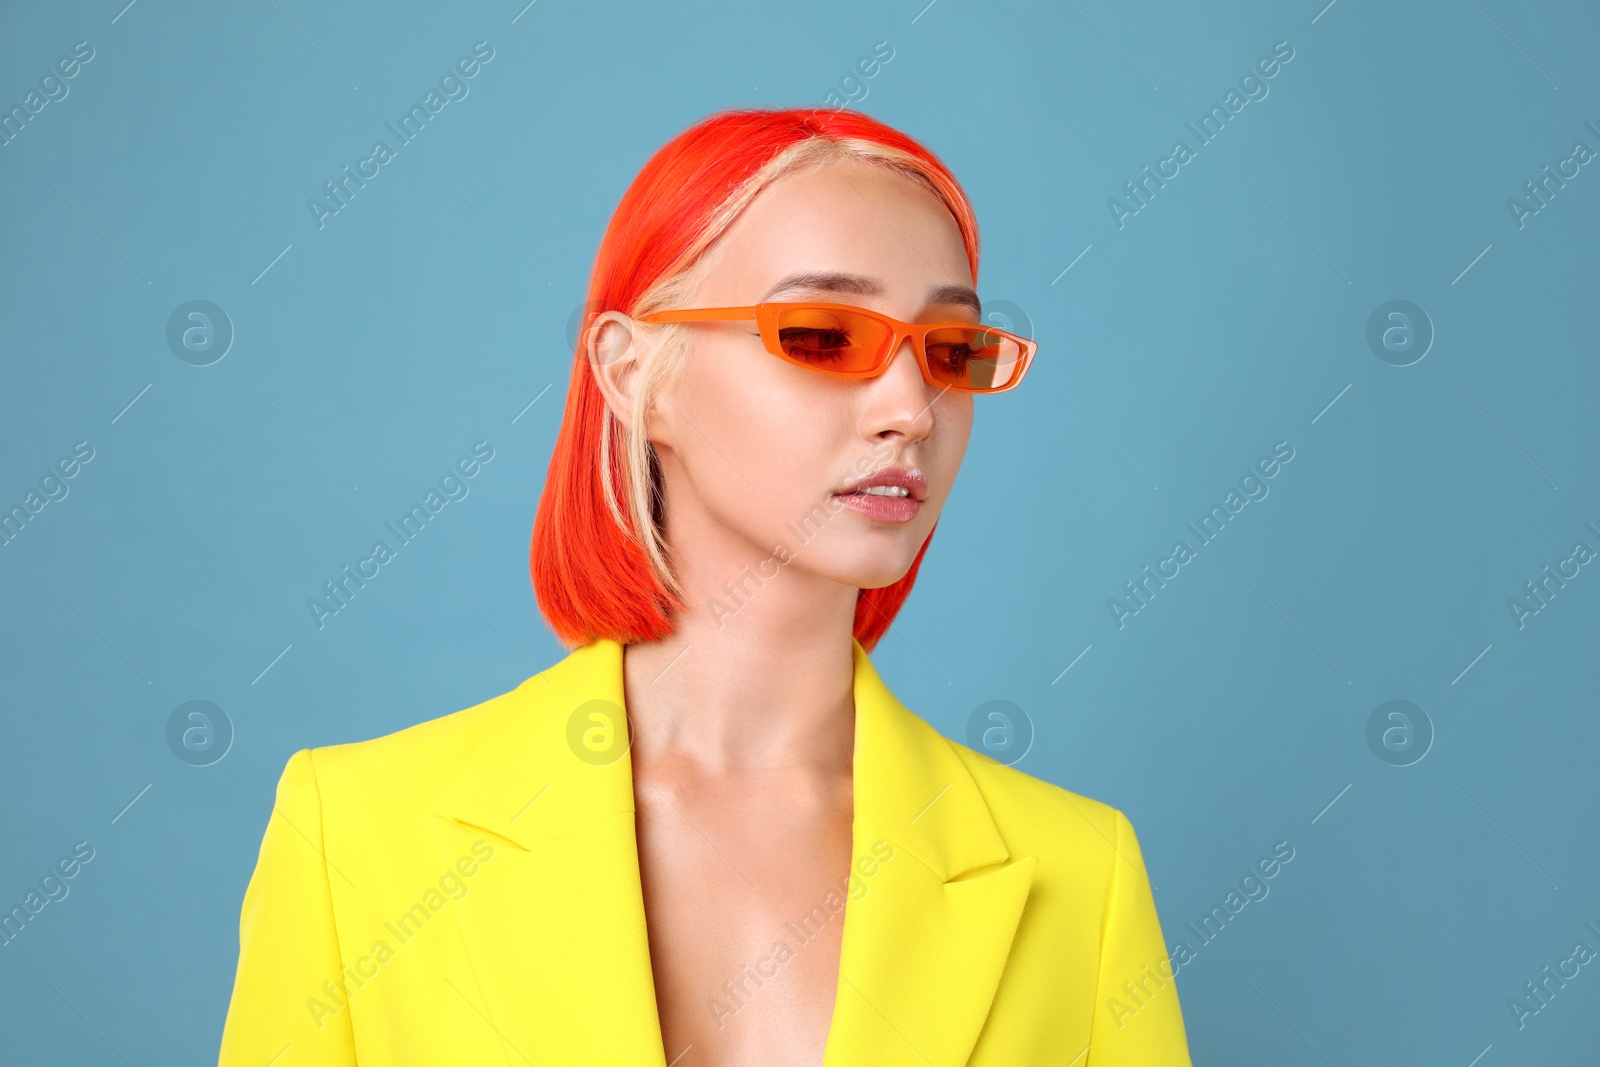 Photo of Beautiful young woman with bright dyed hair on turquoise background